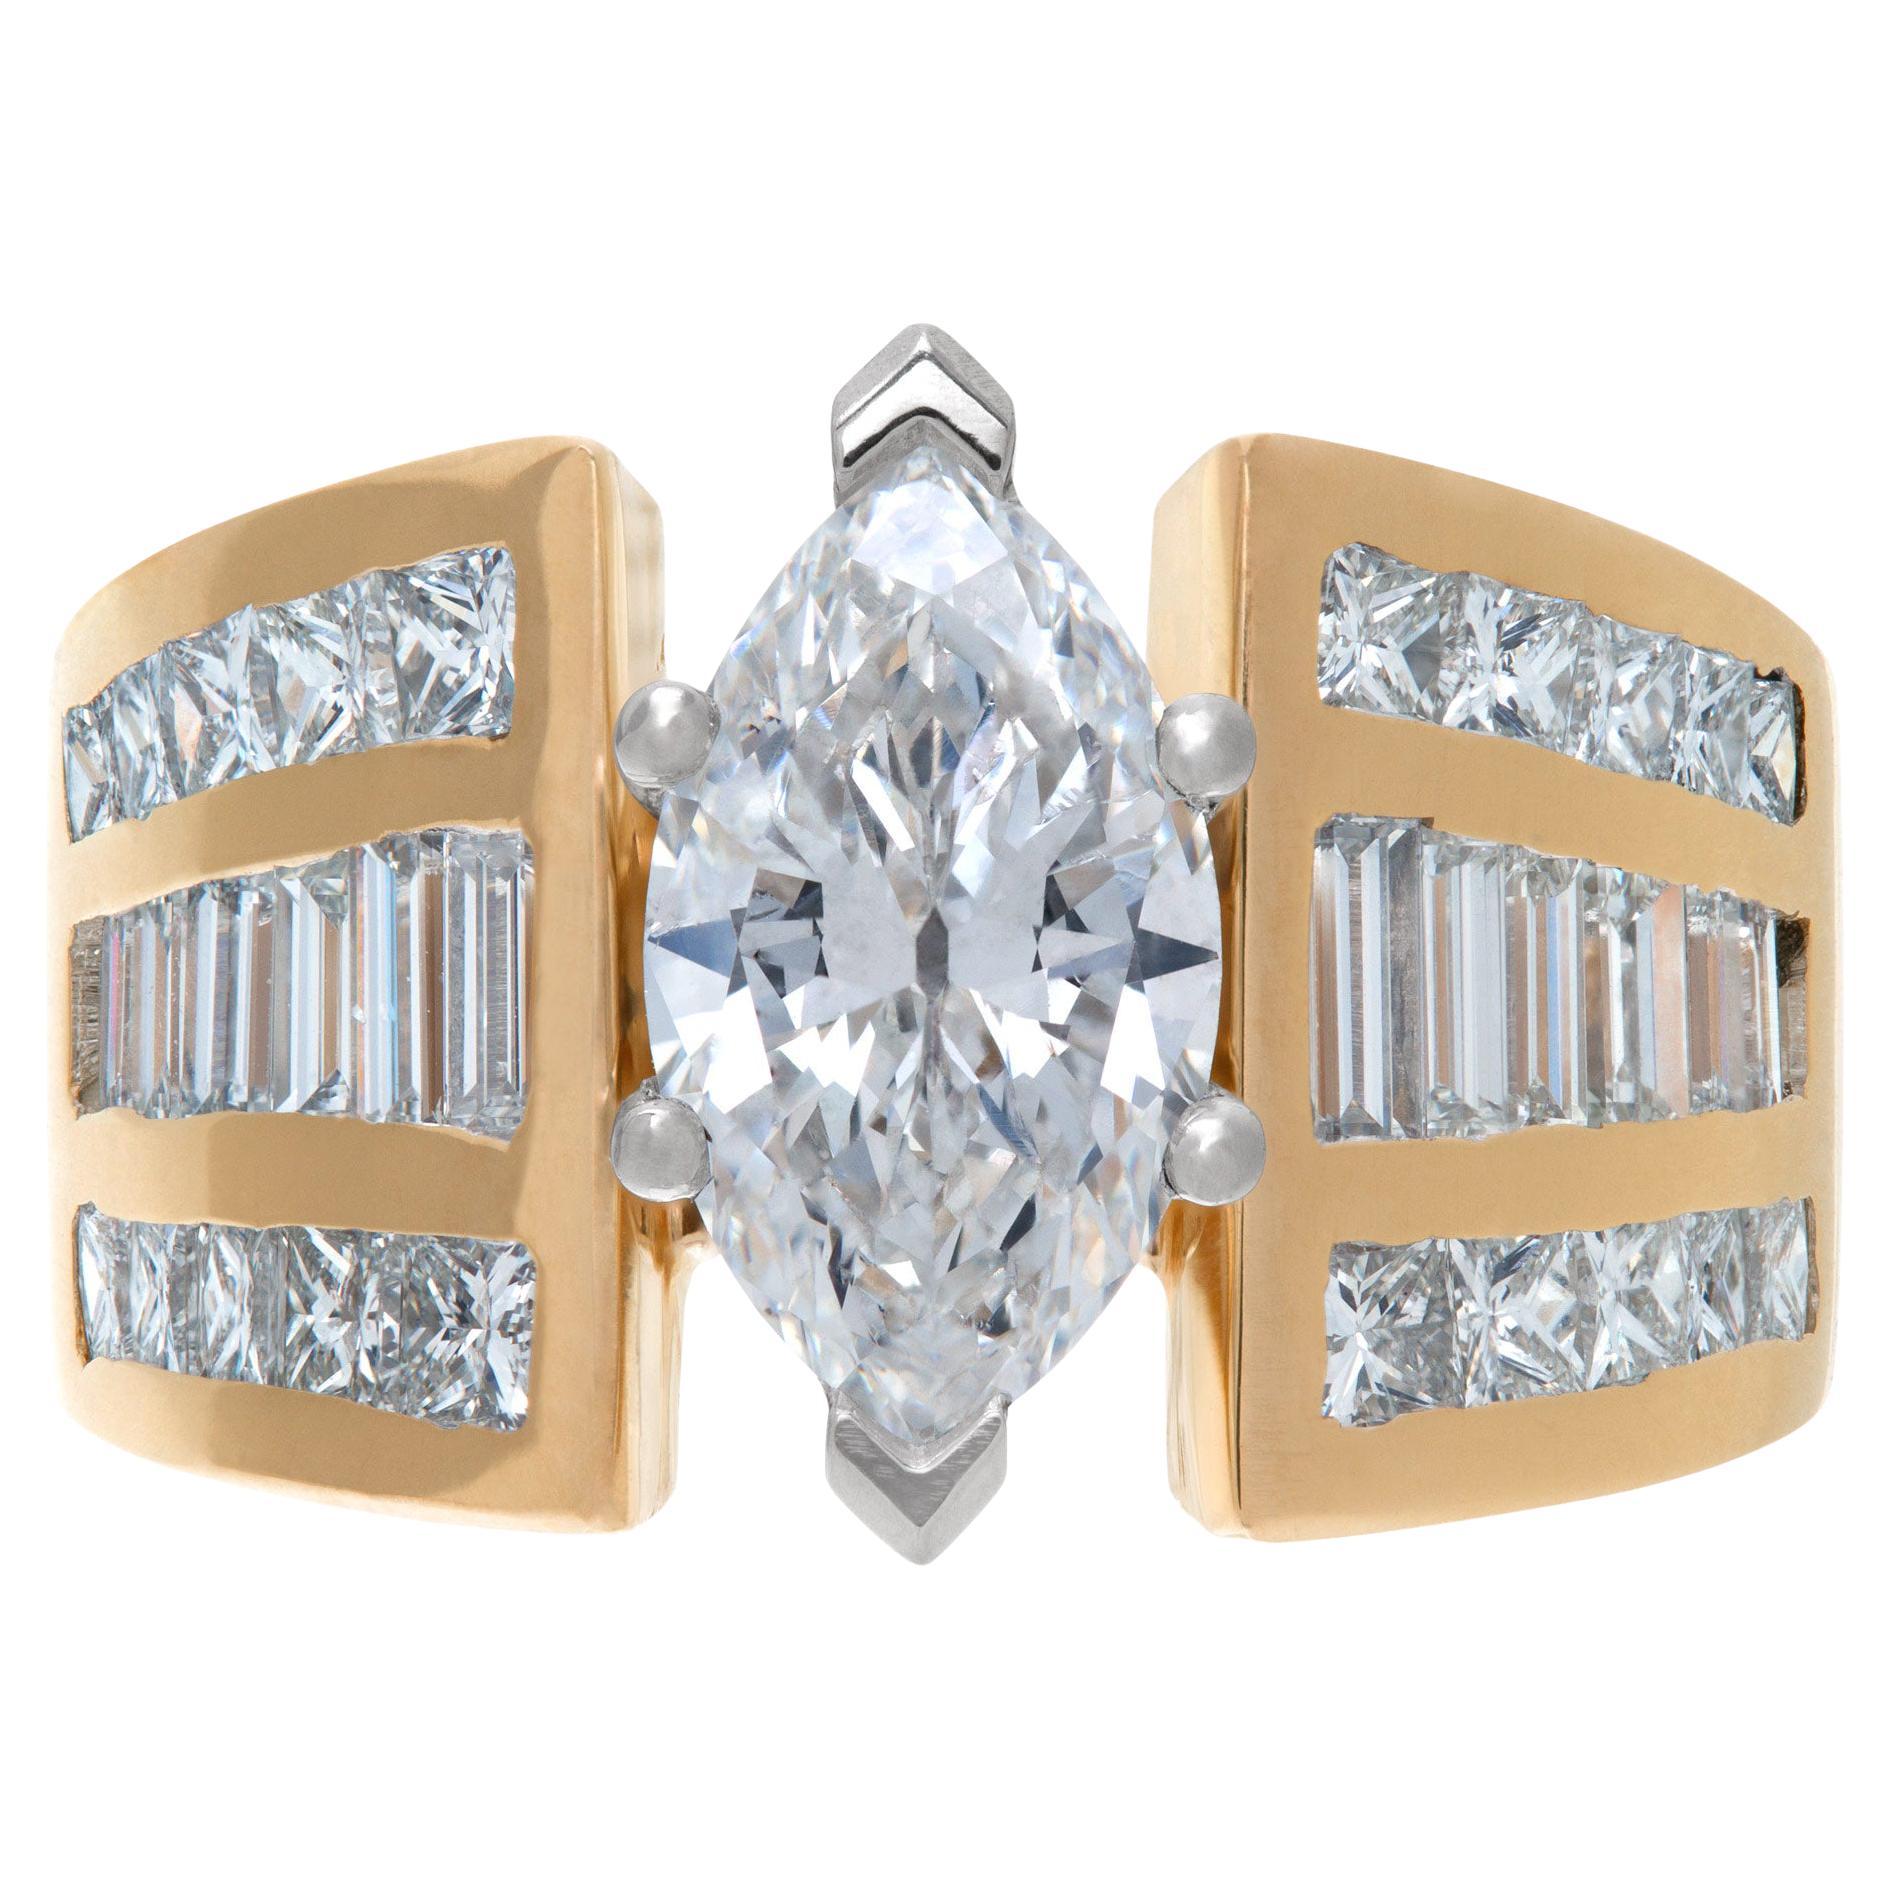 Marquise Diamond Ring 1.52 Carats F Color, SI2 Clarity in a 14k Yellow Gold